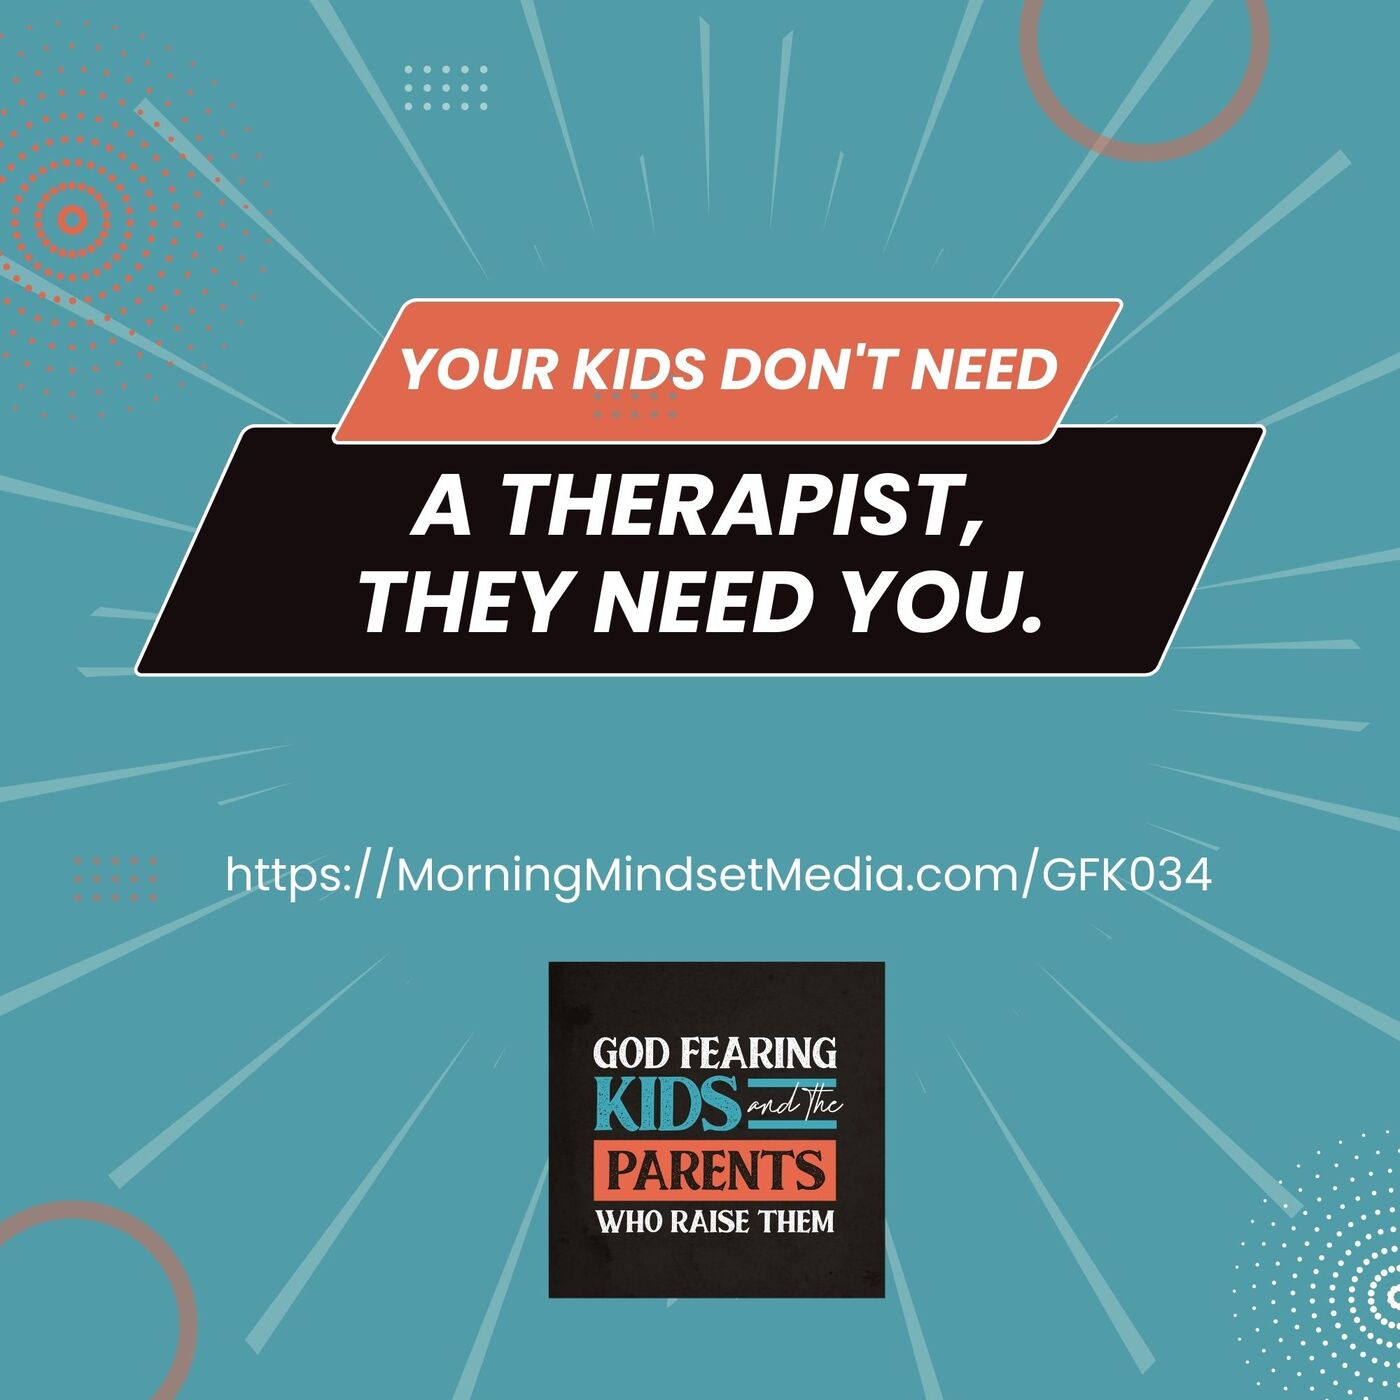 034: Your kids don’t need a therapist, they need you